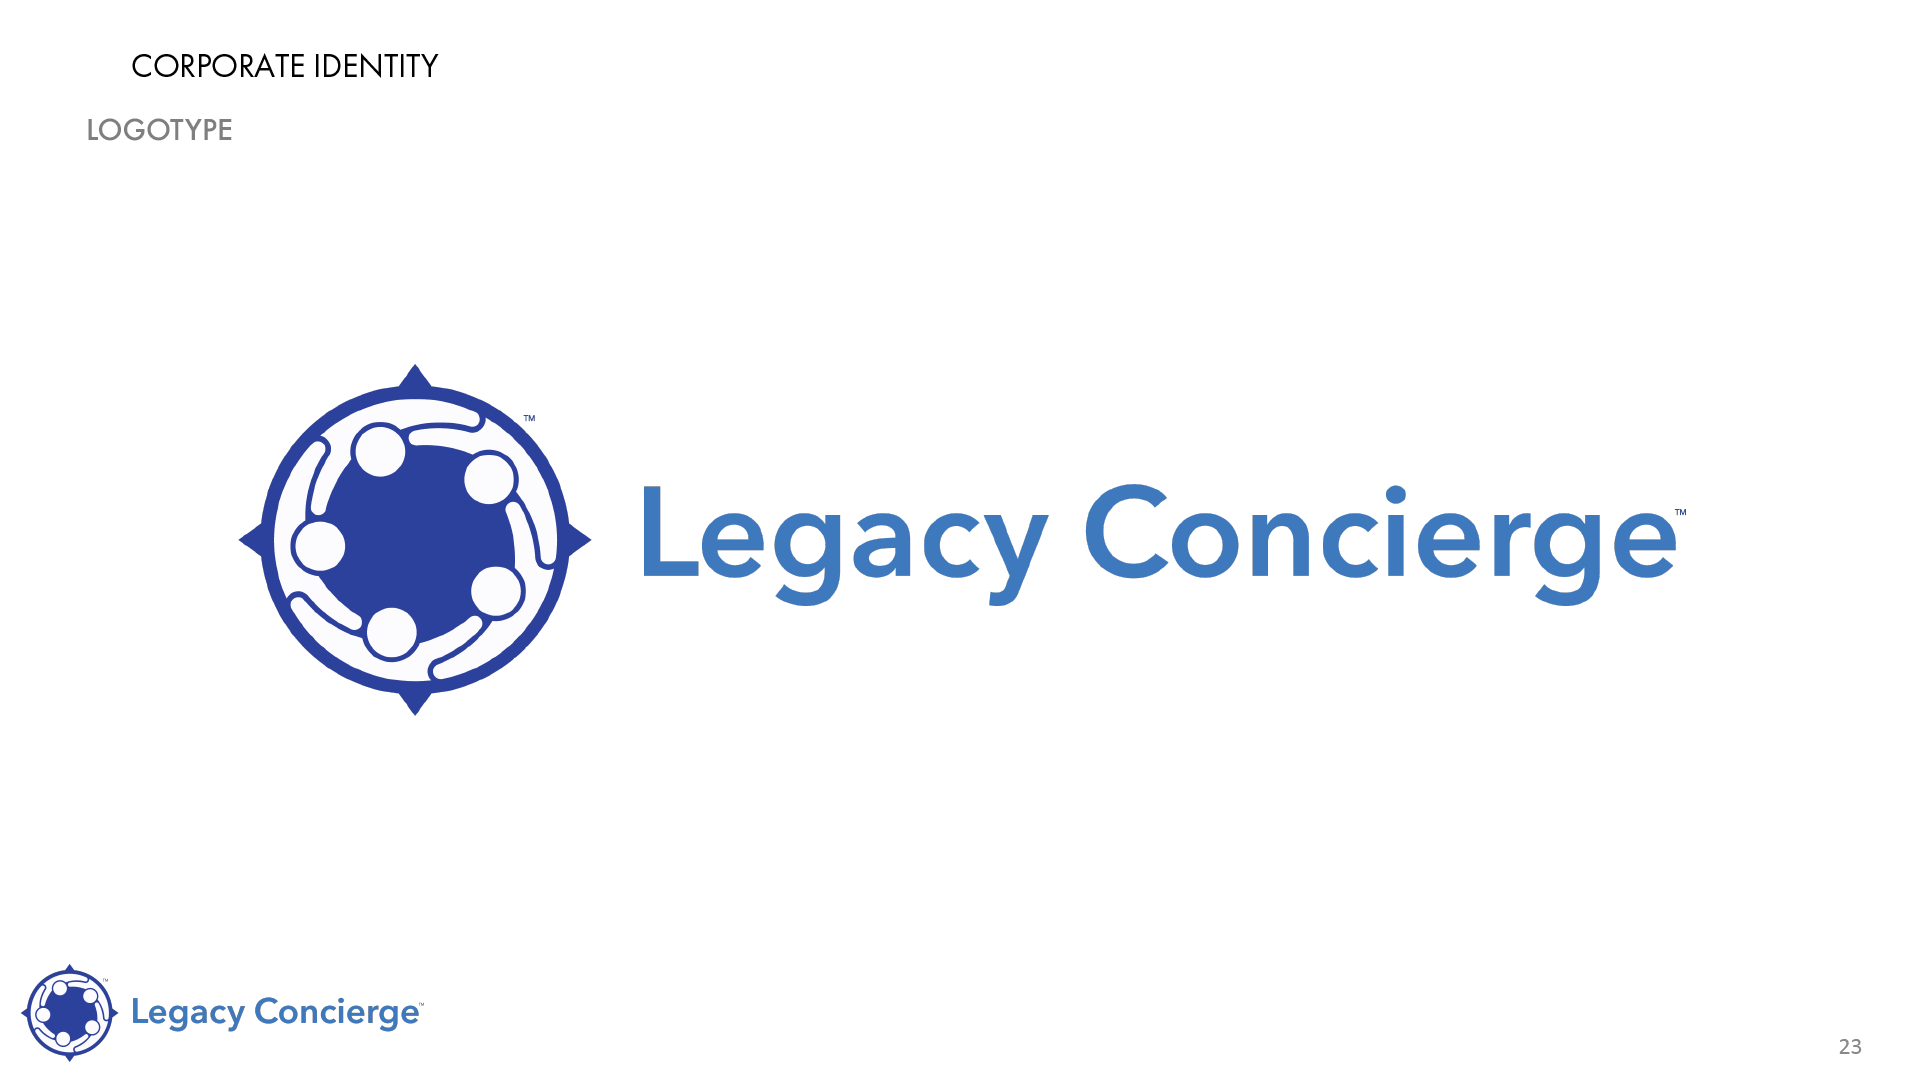 LEGACY_CONCIERGE_STYLEGUIDE-23.png